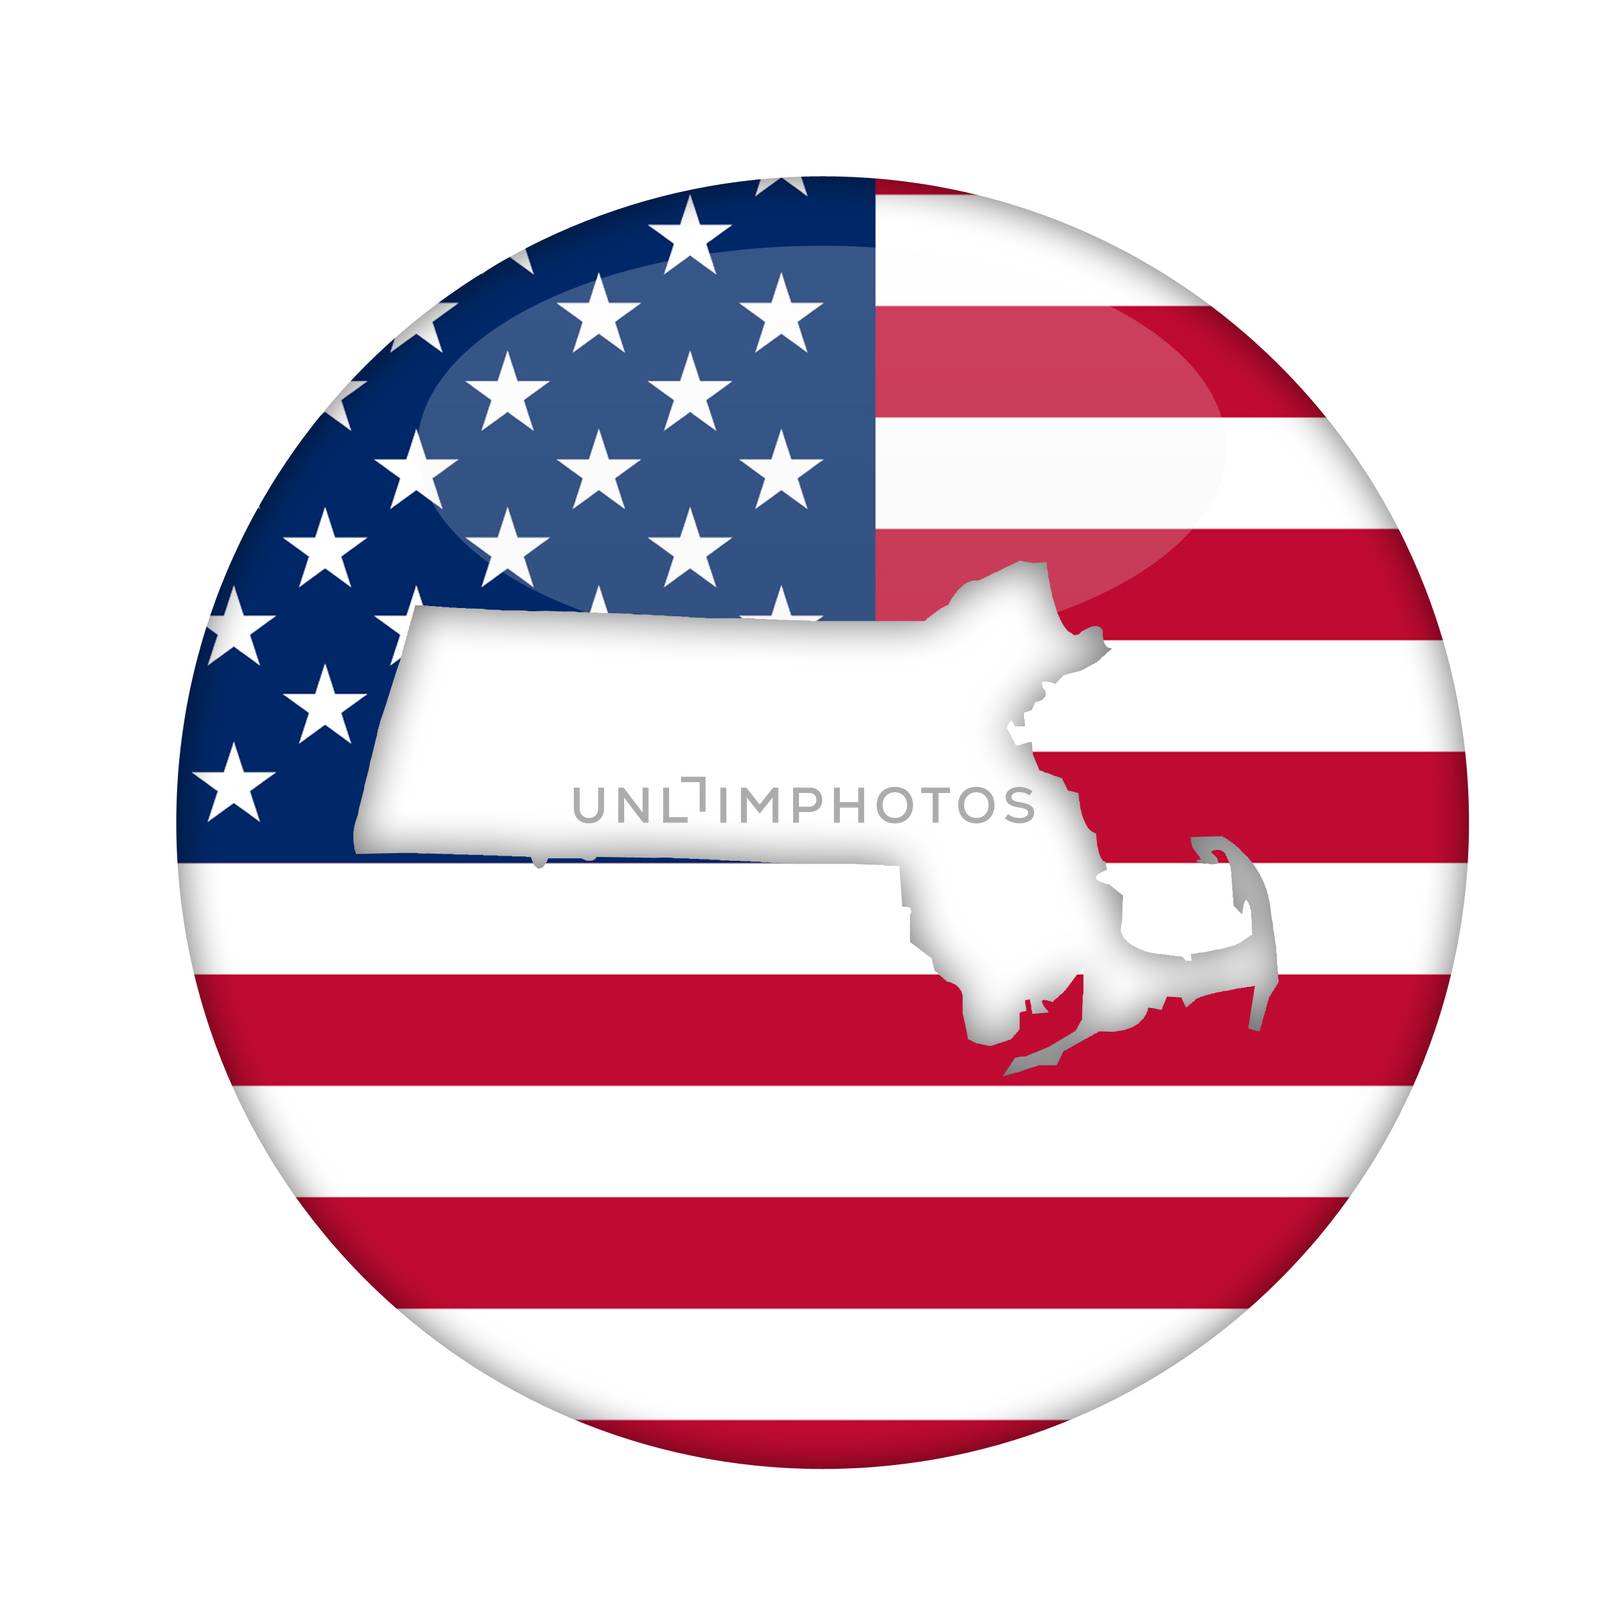 Massachusetts state of America badge isolated on a white background.